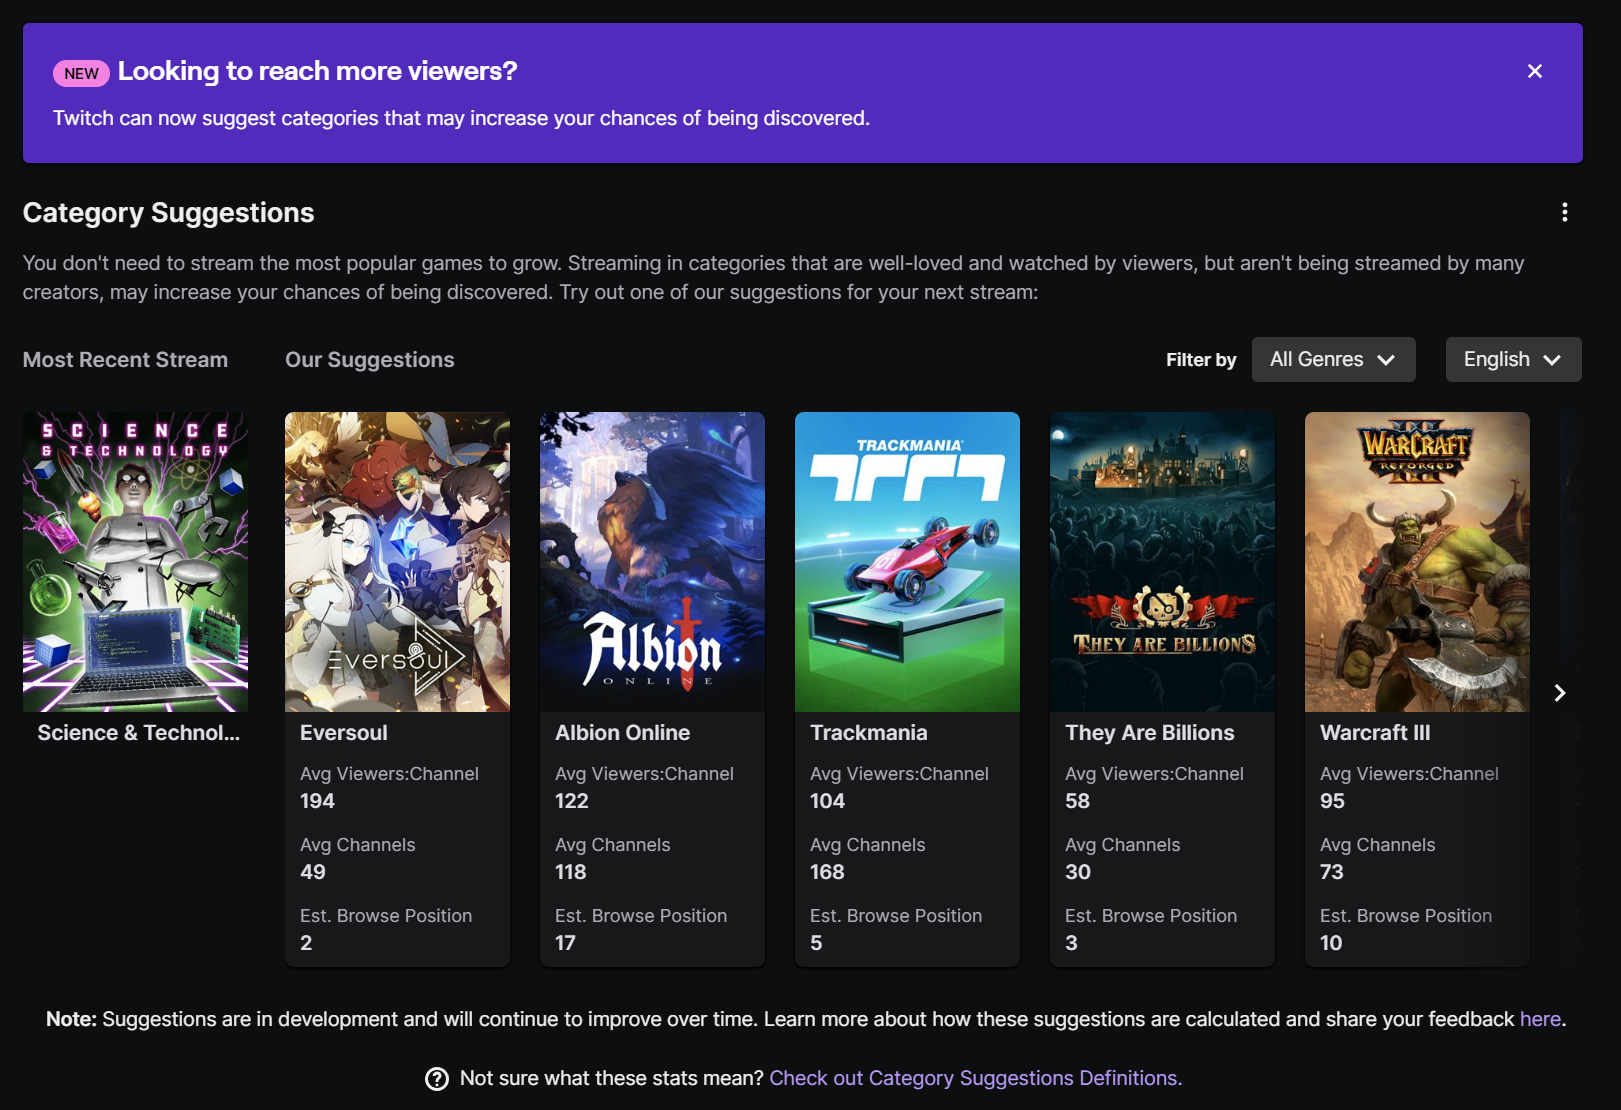 Twitch is suggesting Eversoul, Albion Online, Trackmania, They Are Billions, and Warcraft III